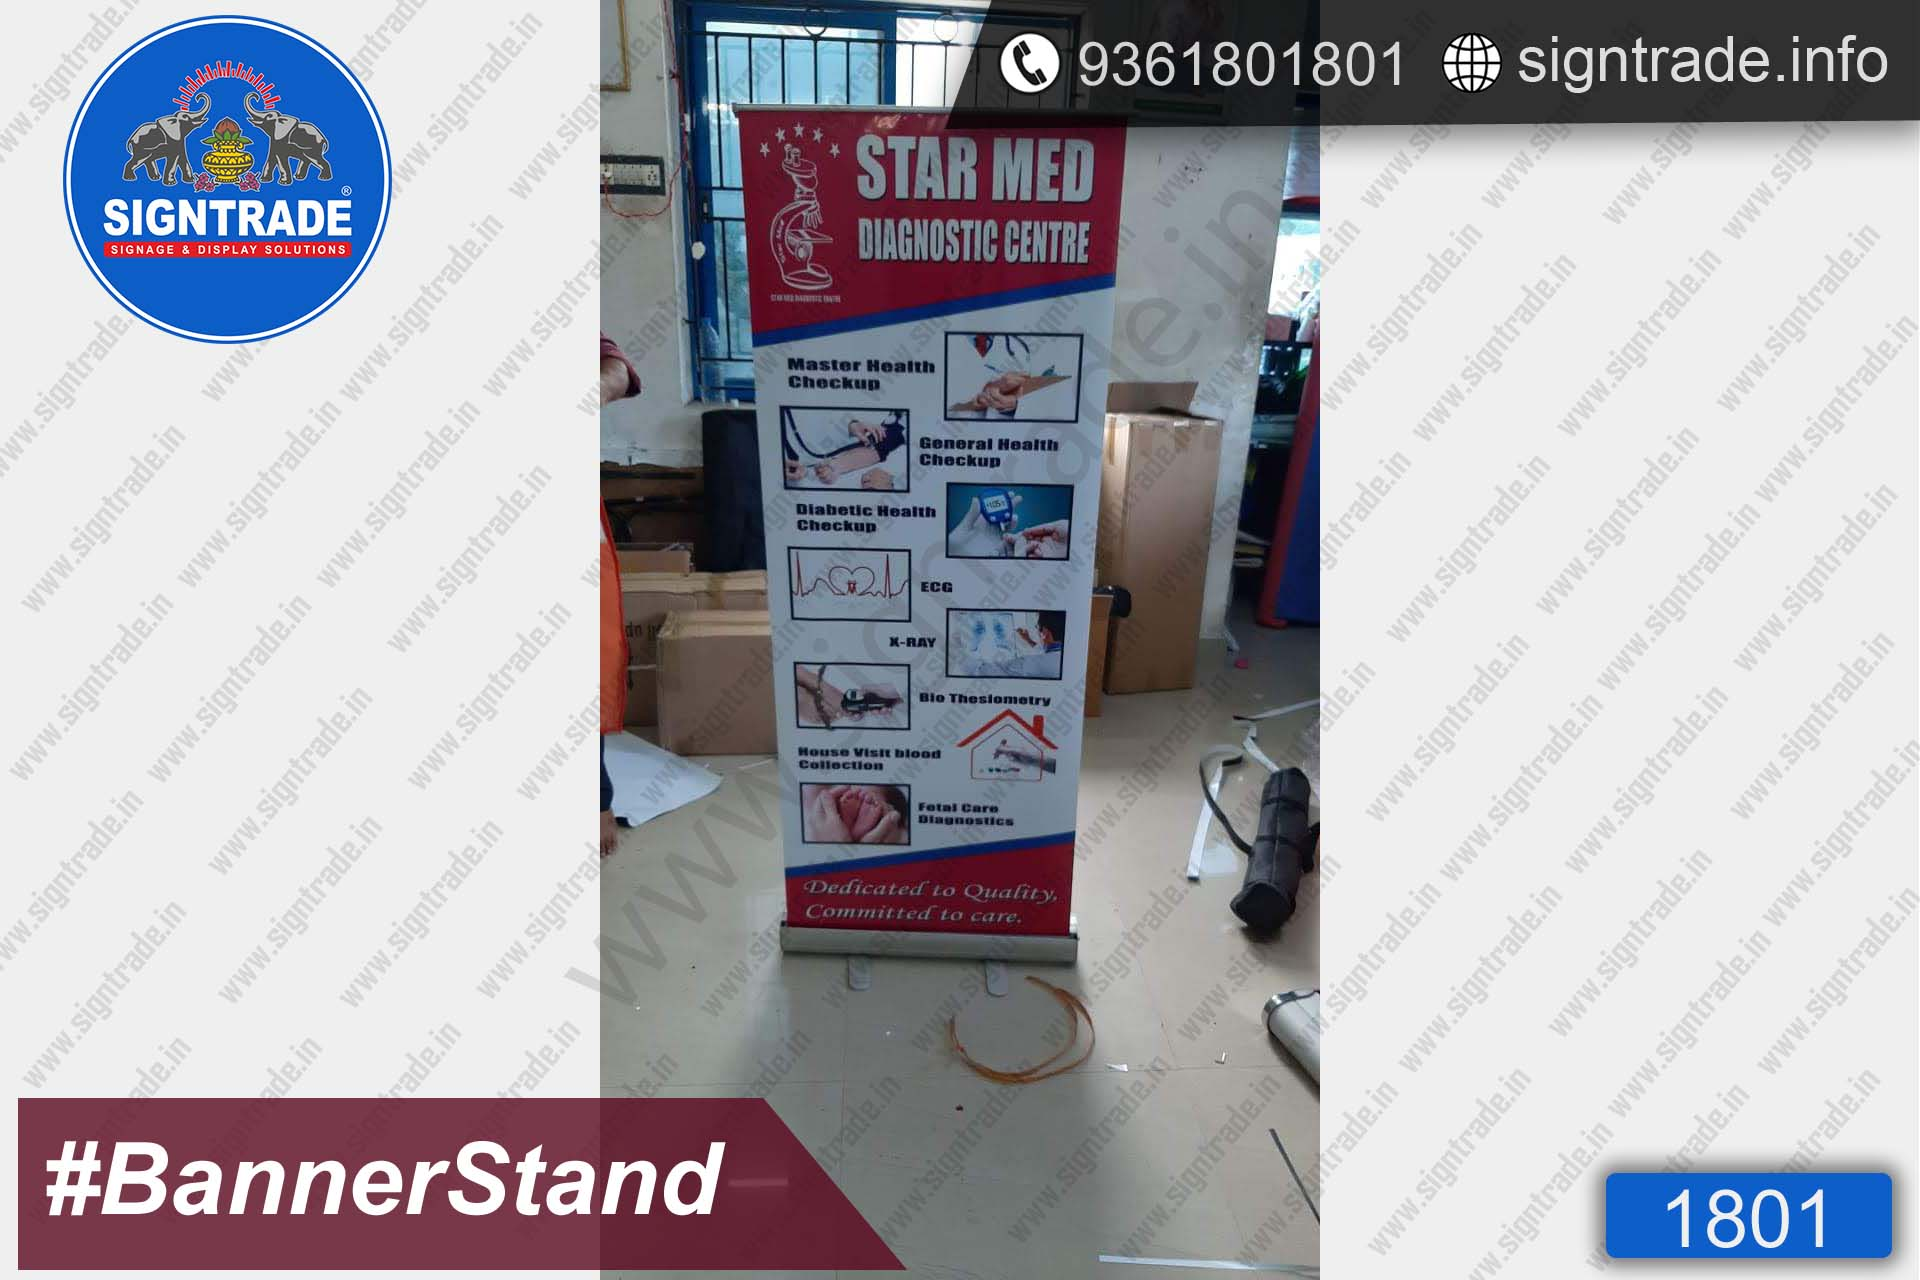 starmed diagnostic center banner stand